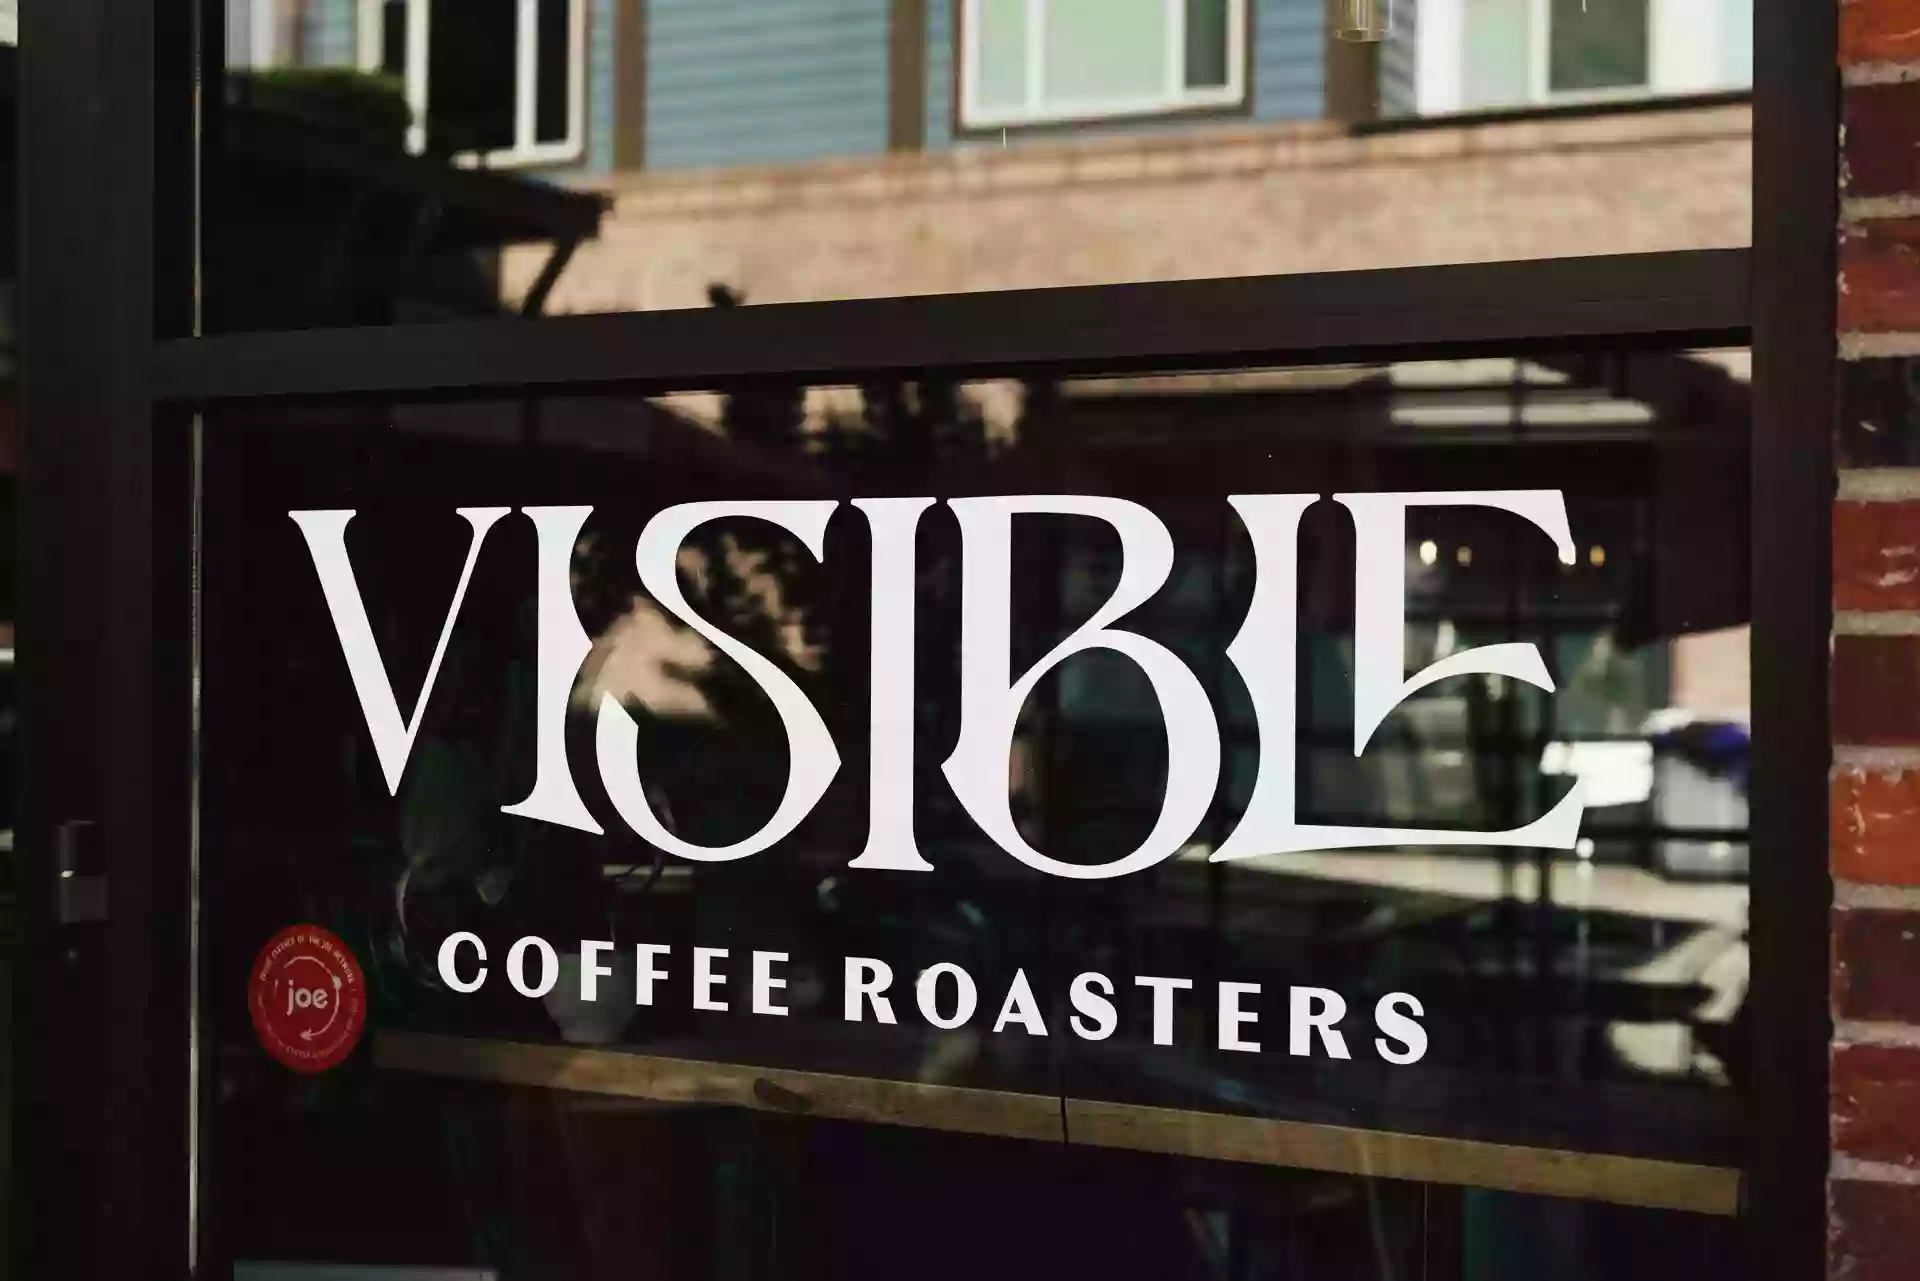 Visible Coffee Roasters